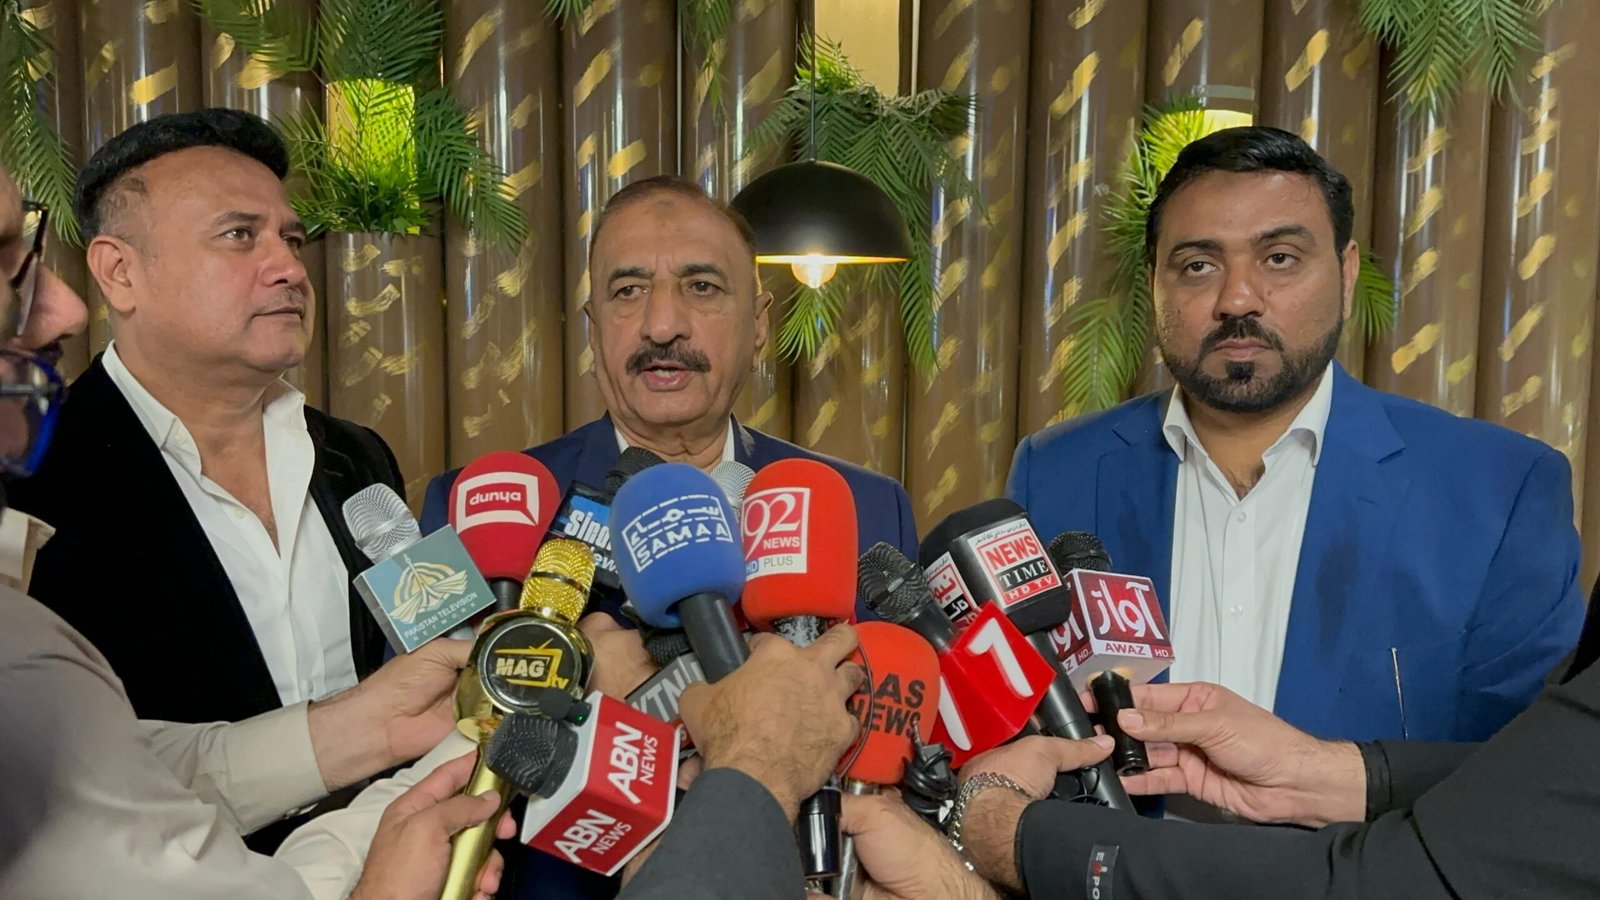 New Press Consular Urges Journalists to Highlight Pakistan’s Beauty and Hospitality | Baaghi TV